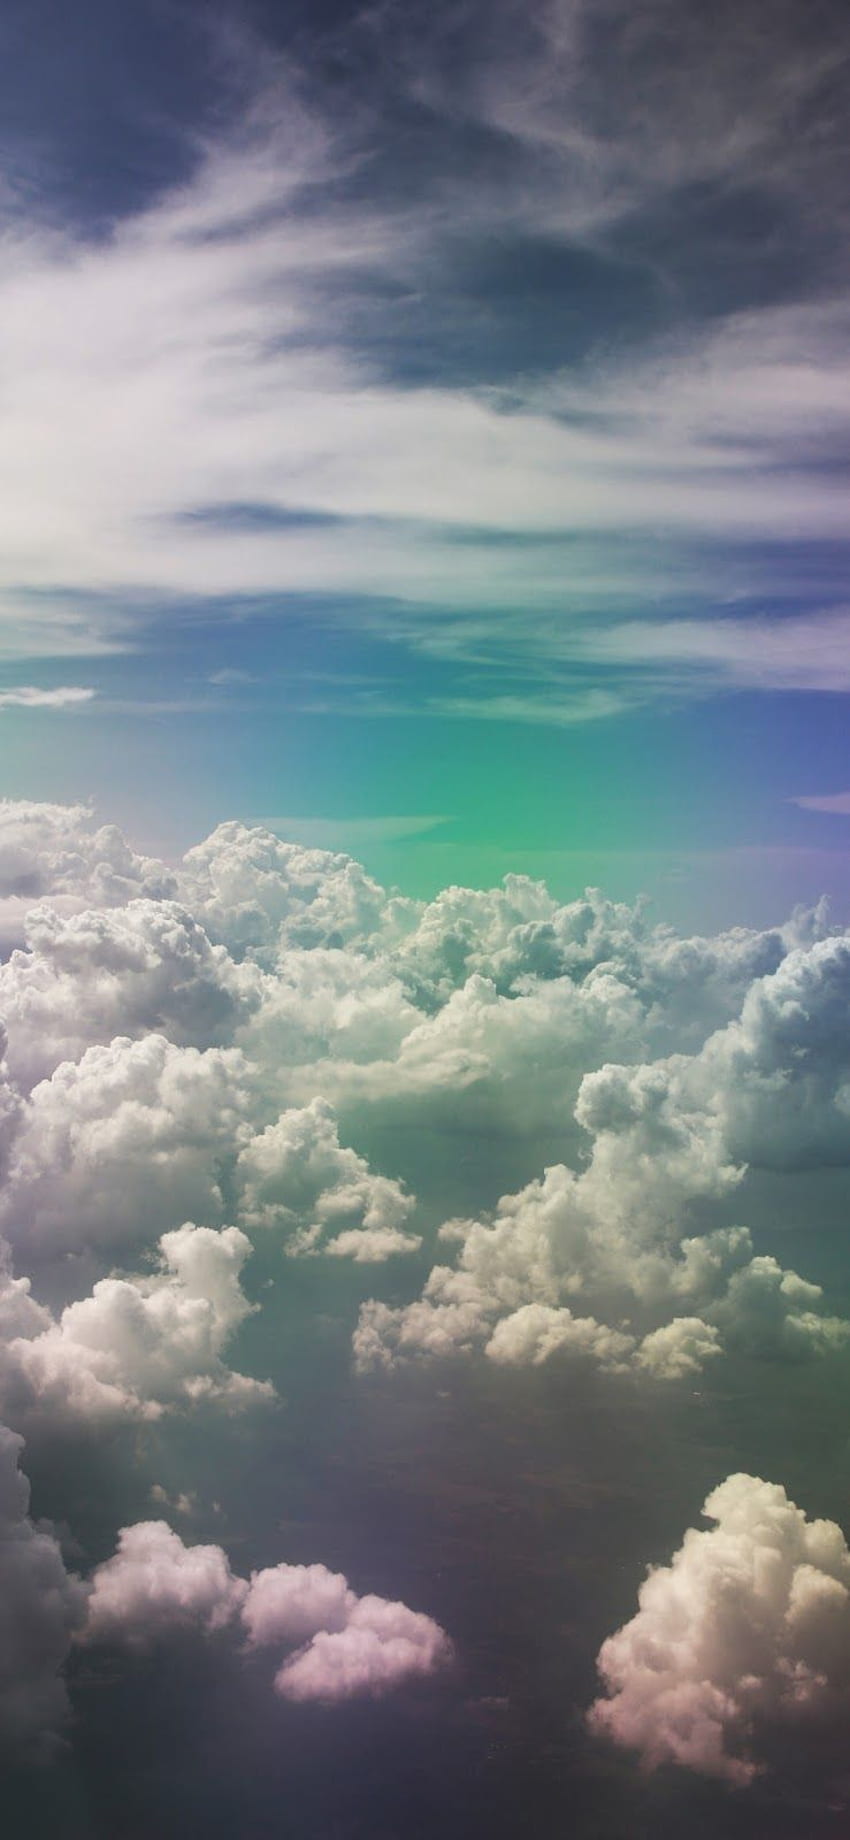 Purple Clouds Wallpapers  Top Free Purple Clouds Backgrounds   WallpaperAccess